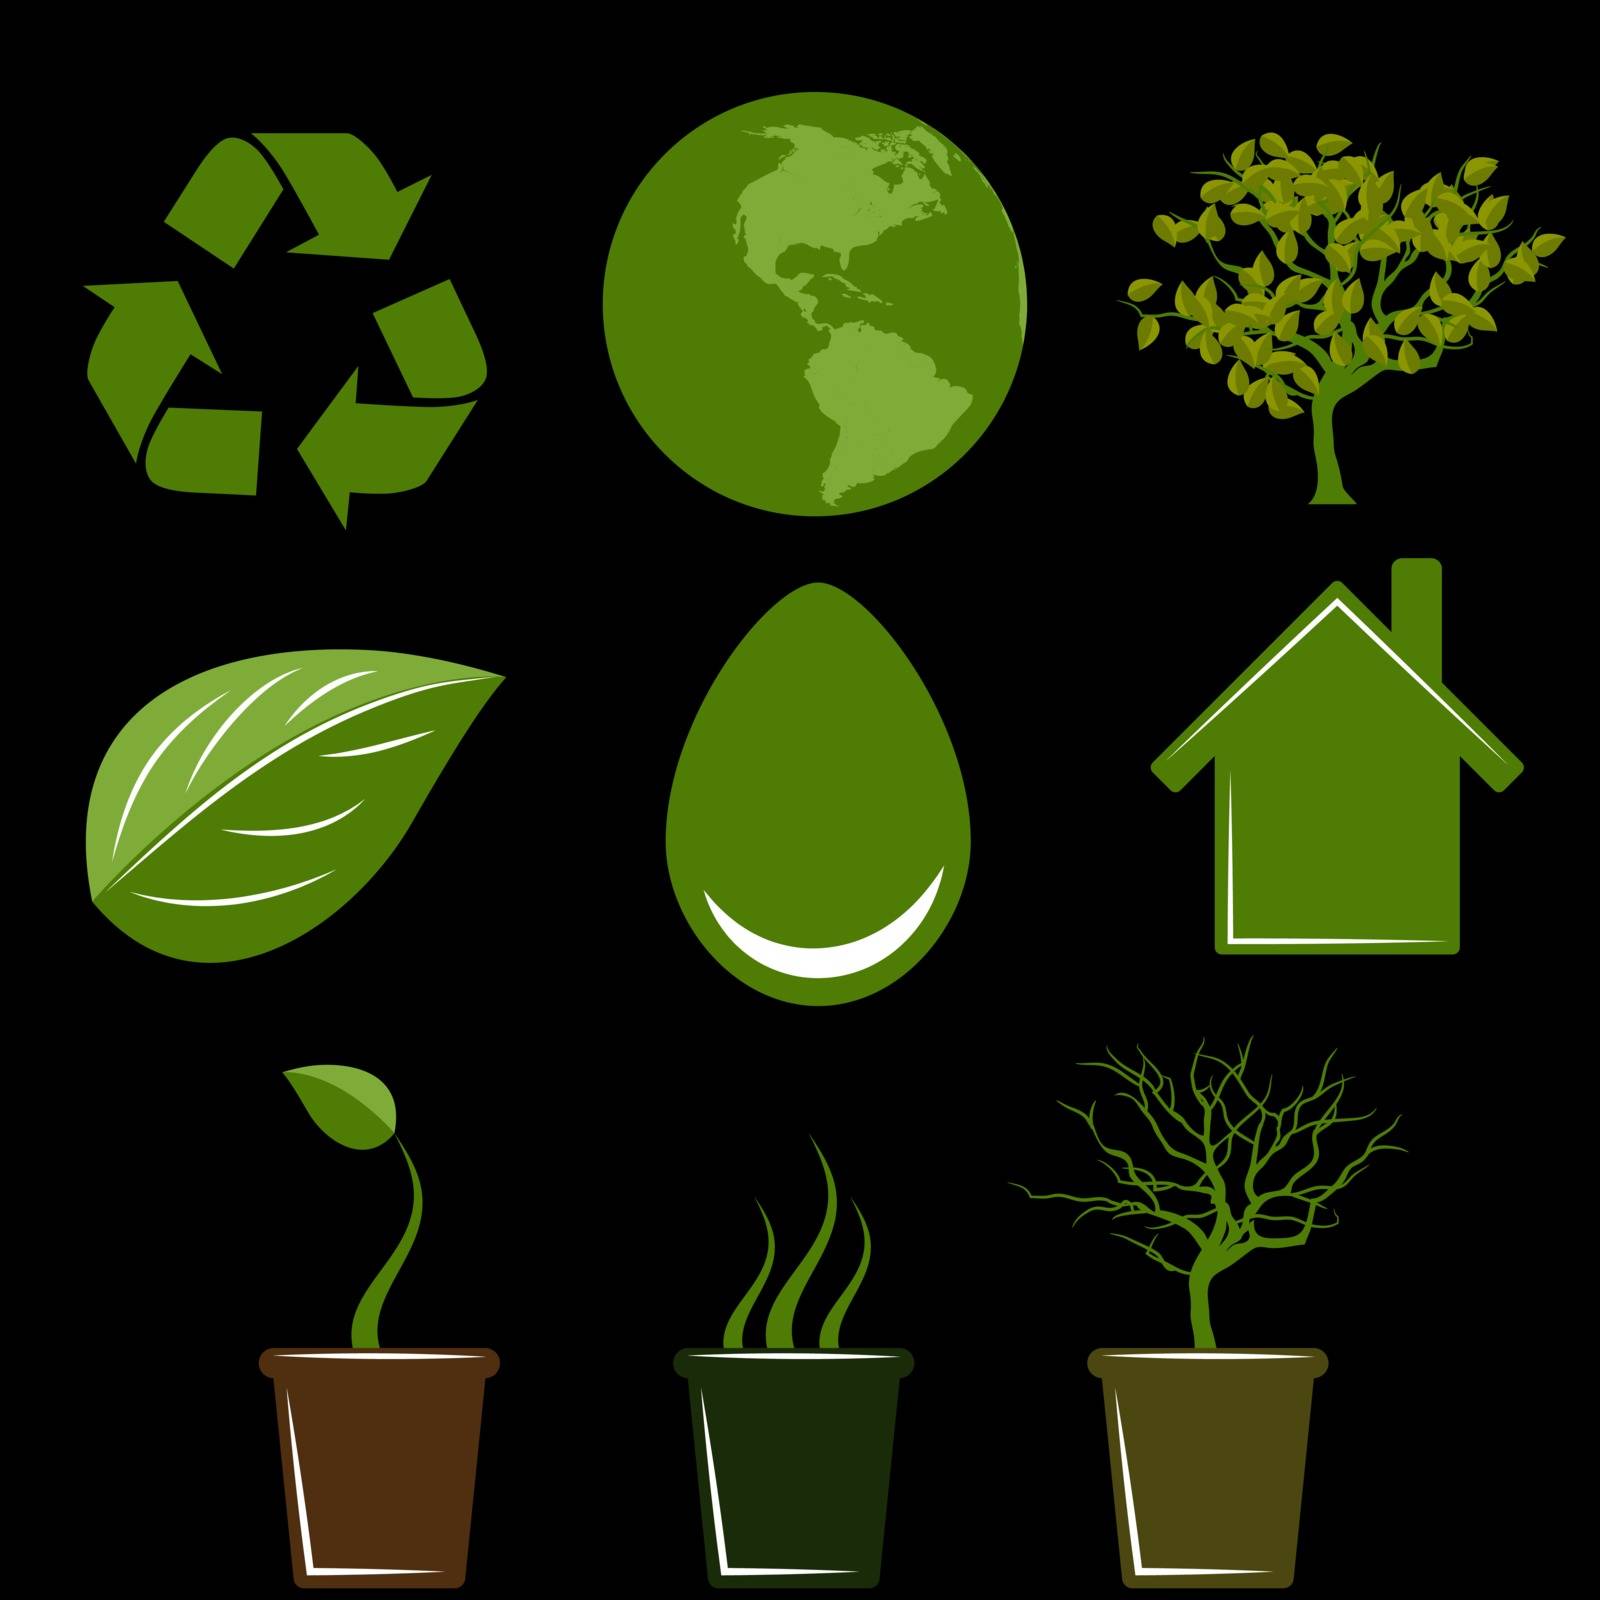 vector illustration of different icons for the Environment